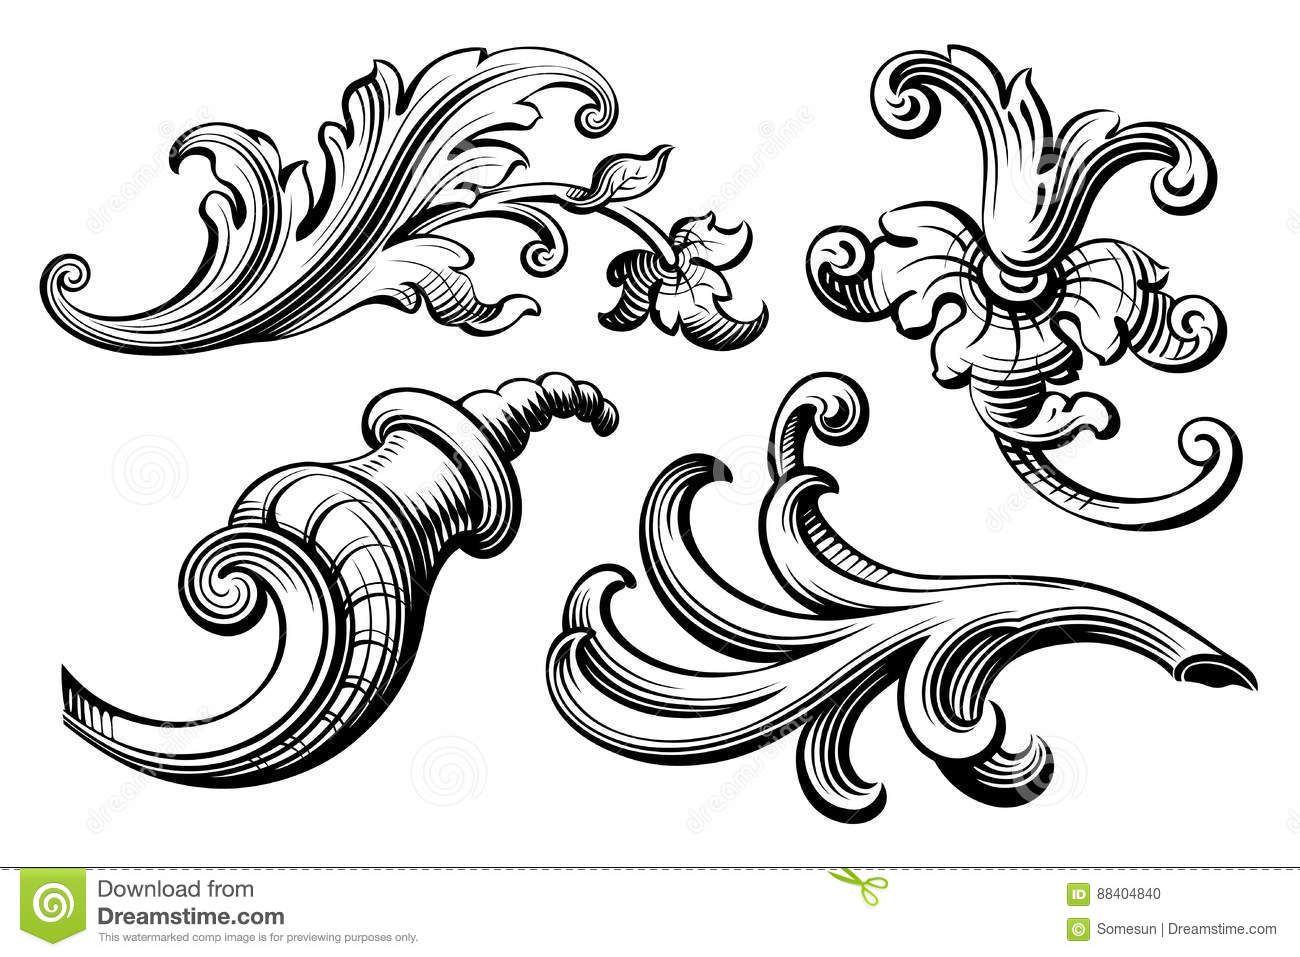 Victorian Ornaments Vector At Collection Of Victorian